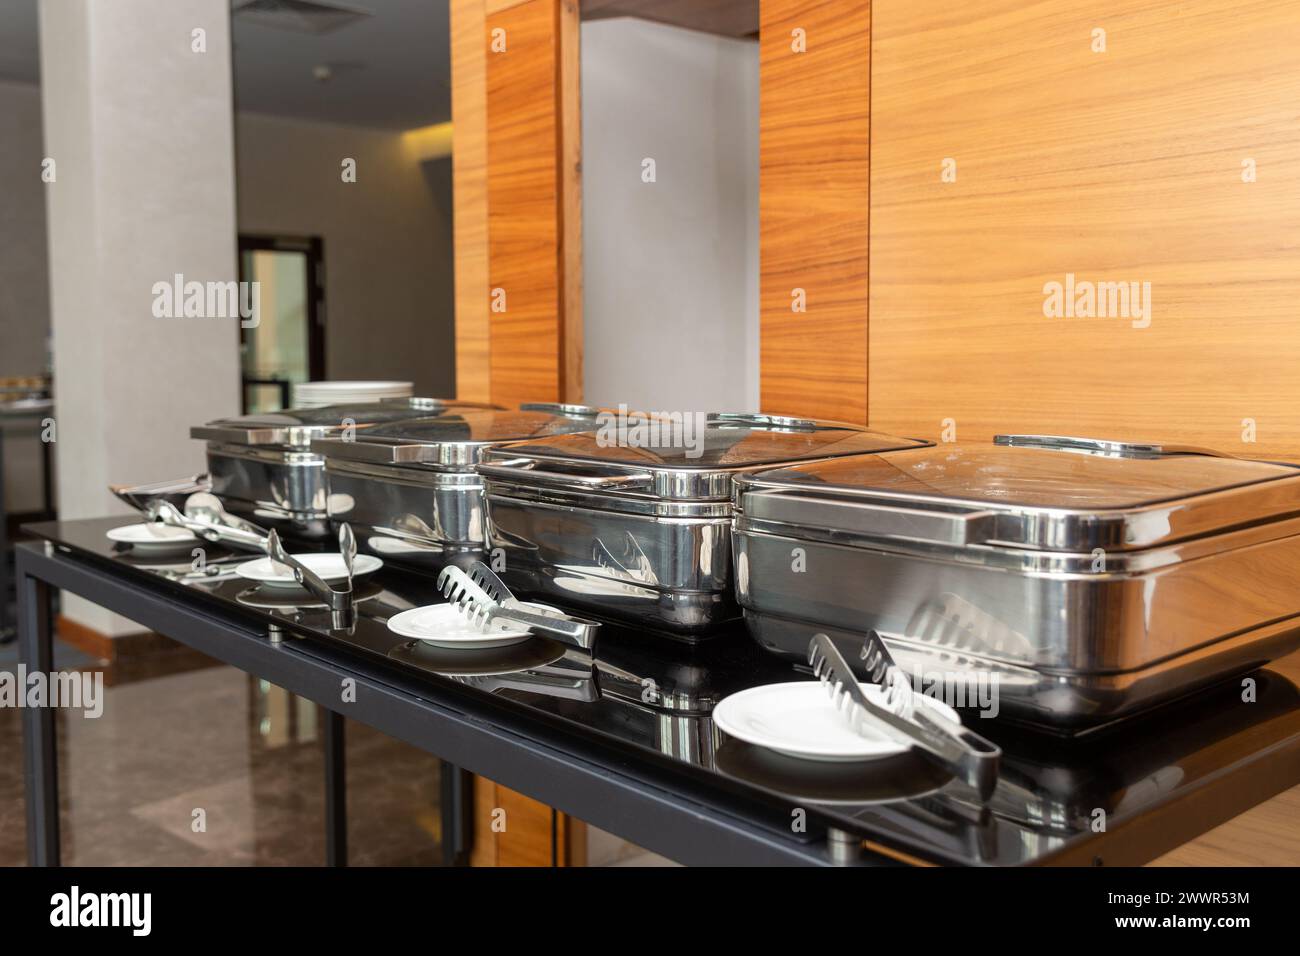 Row of closed chafing dishes at party banquet hall. Marmites ready for service made of stainless steel at buffet. Stock Photo